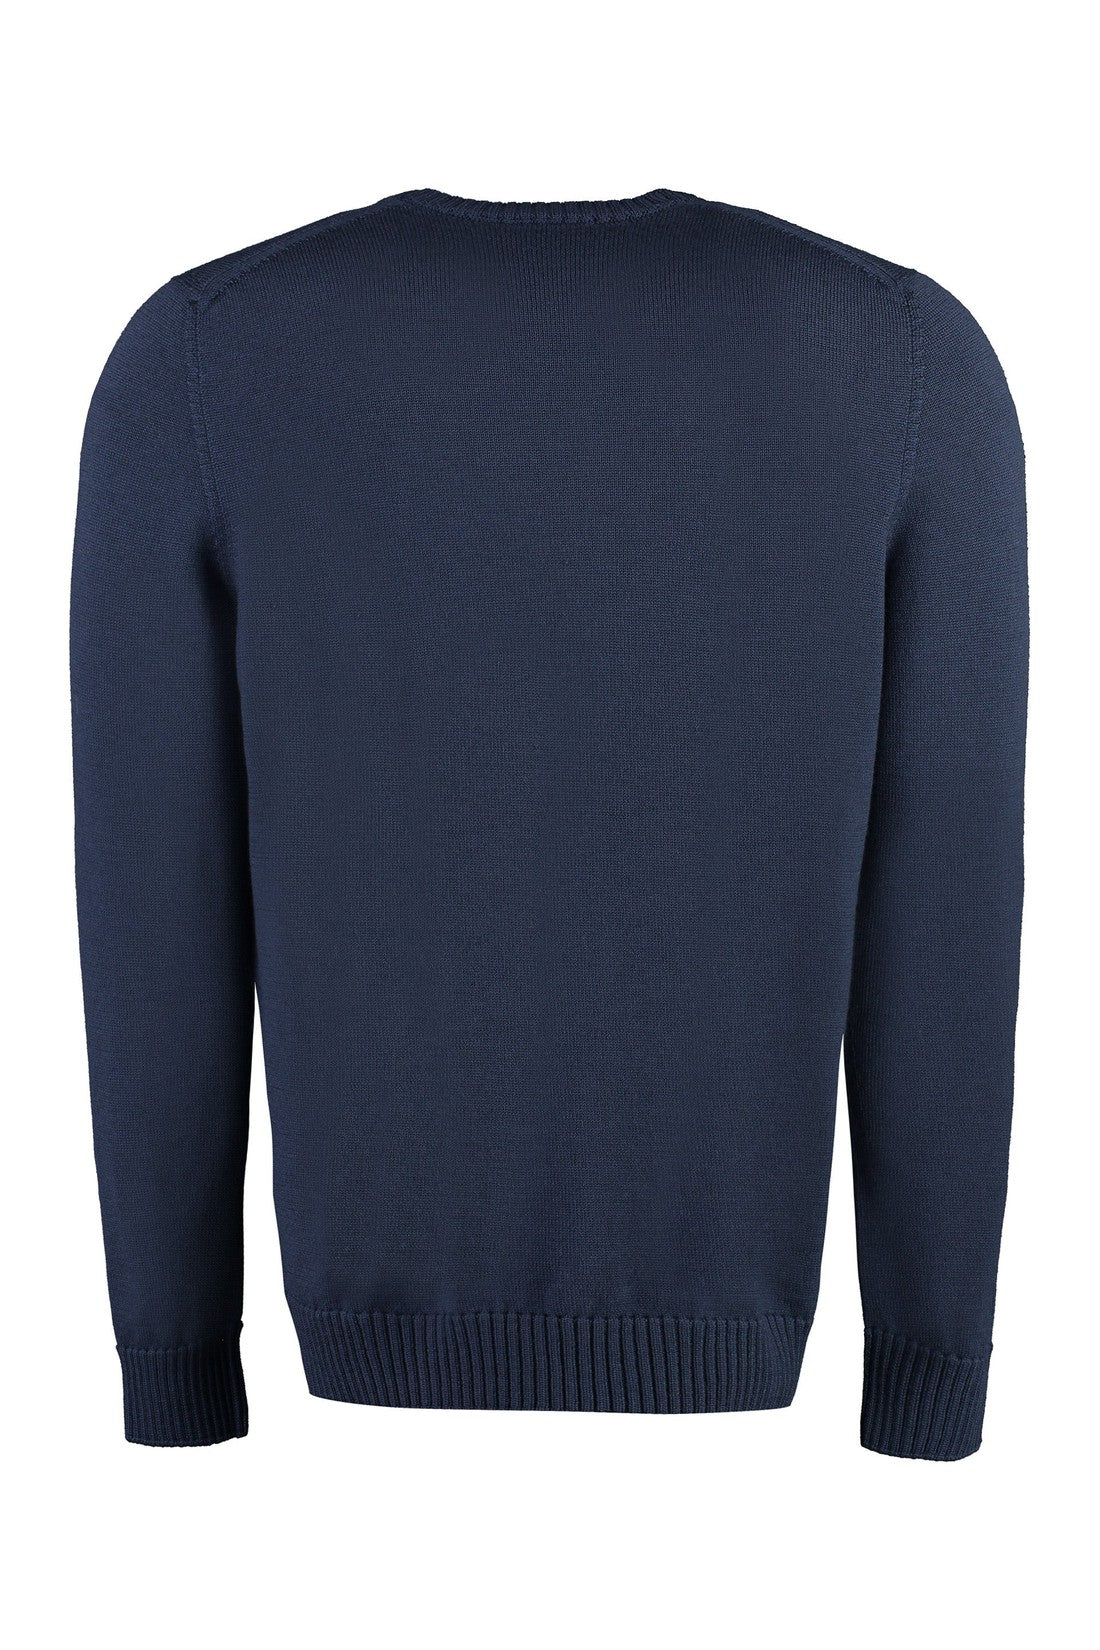 Piralo-OUTLET-SALE-Wool pullover-ARCHIVIST